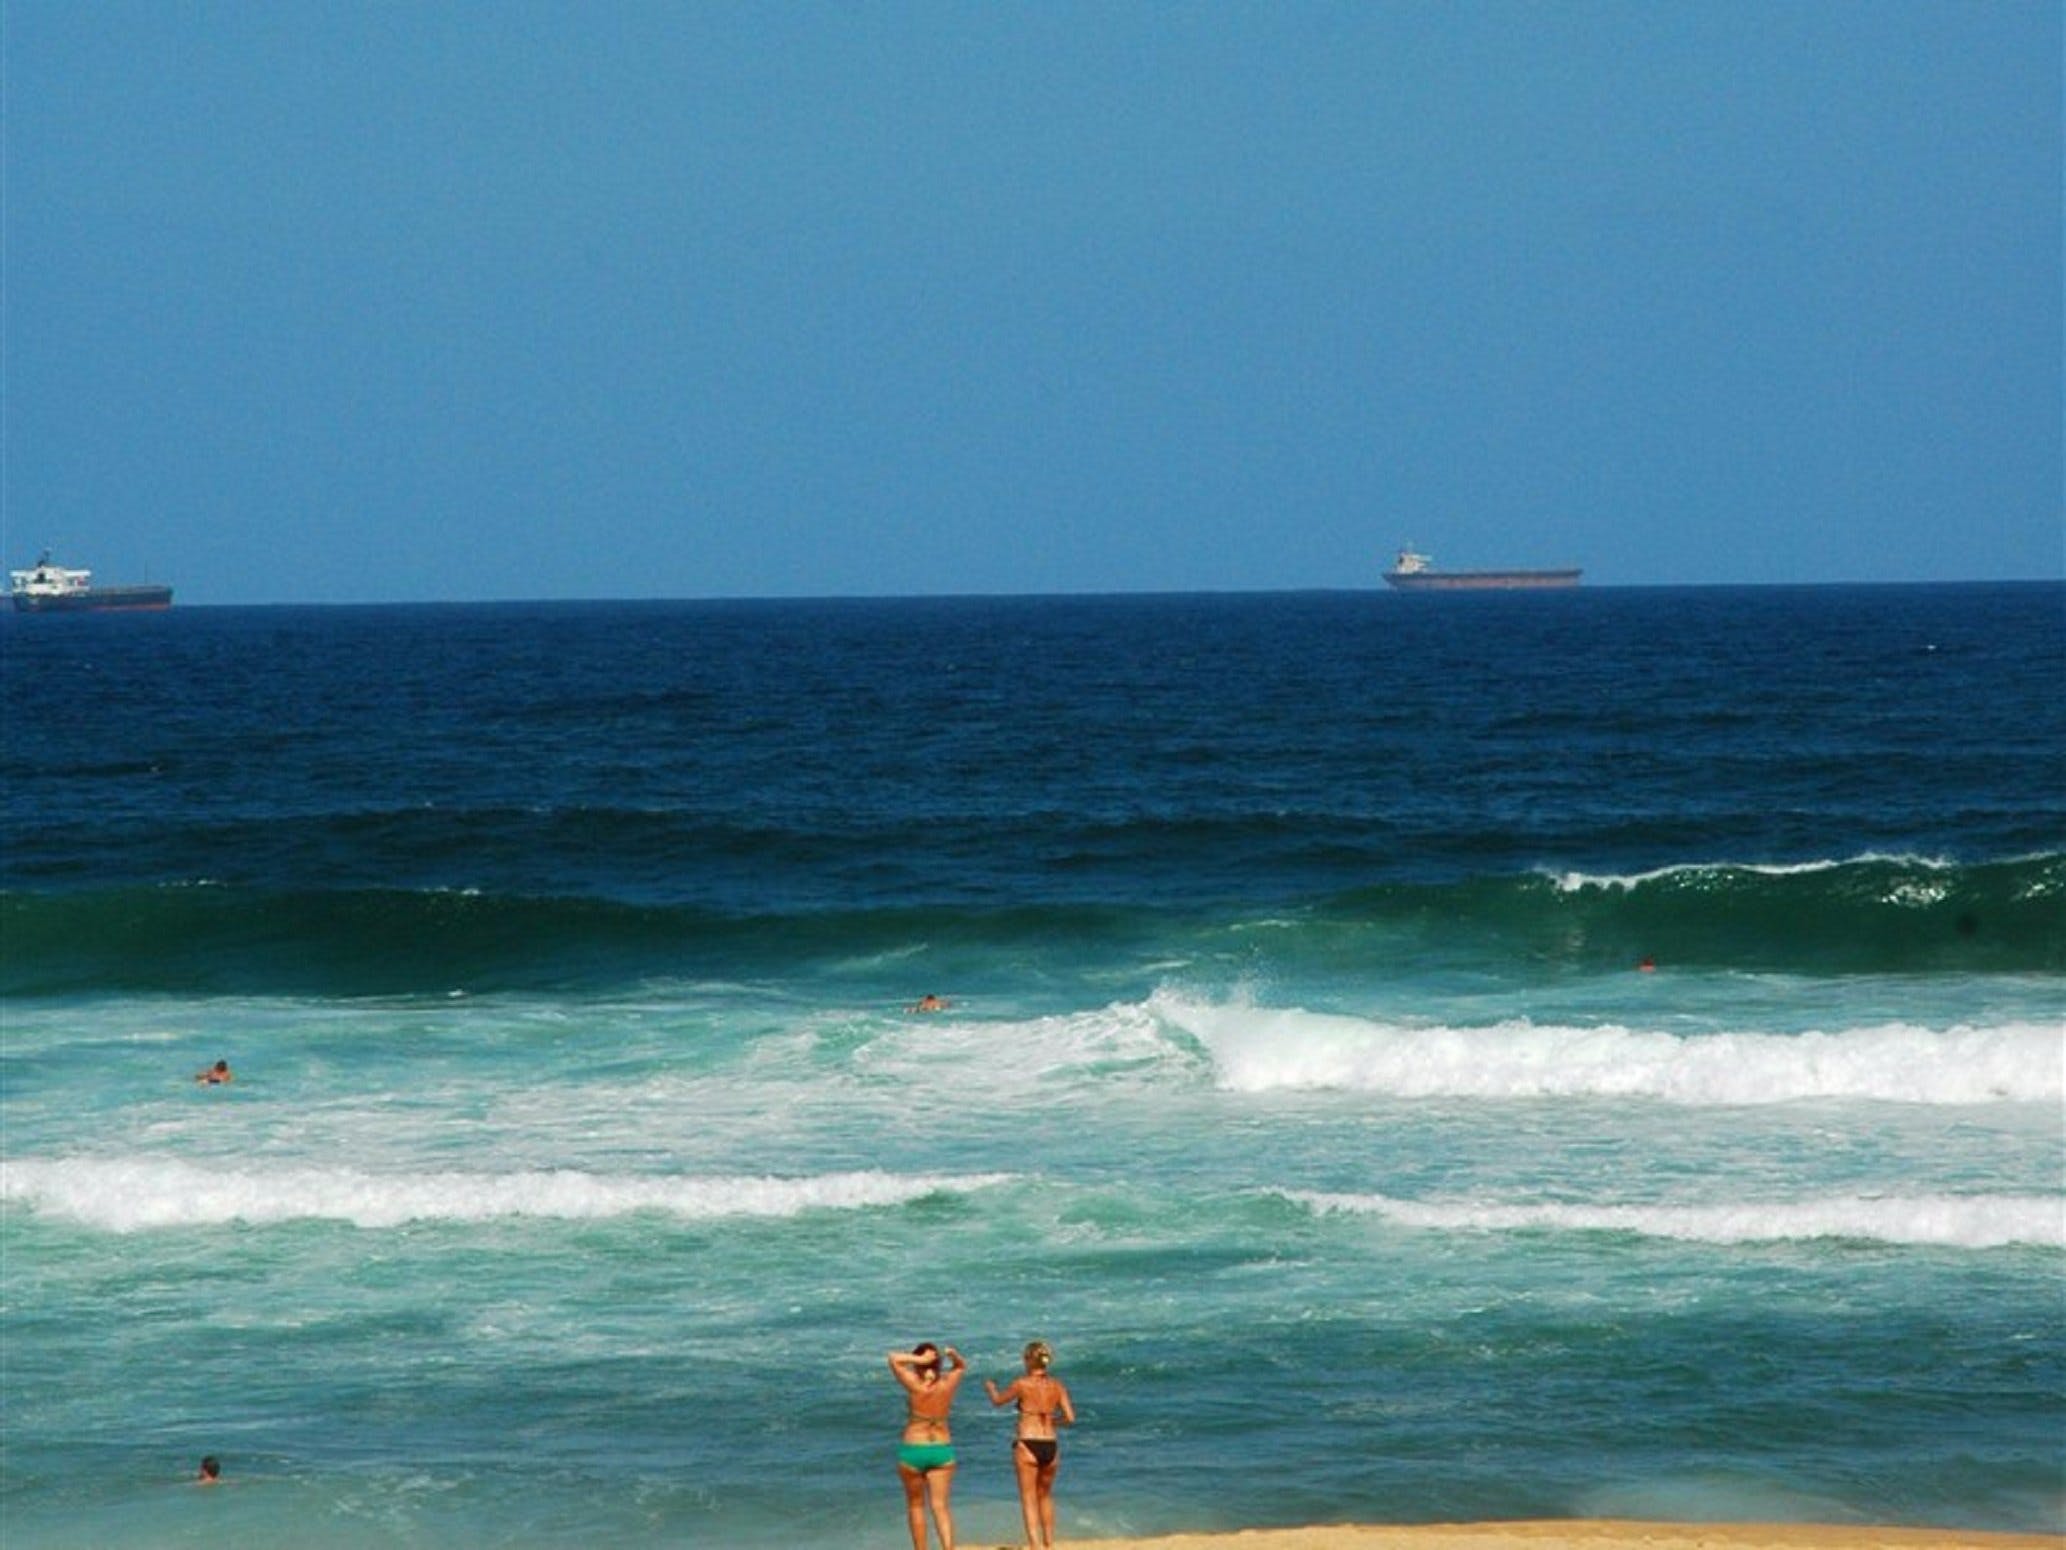 Merewether Beach - Accommodation in Surfers Paradise